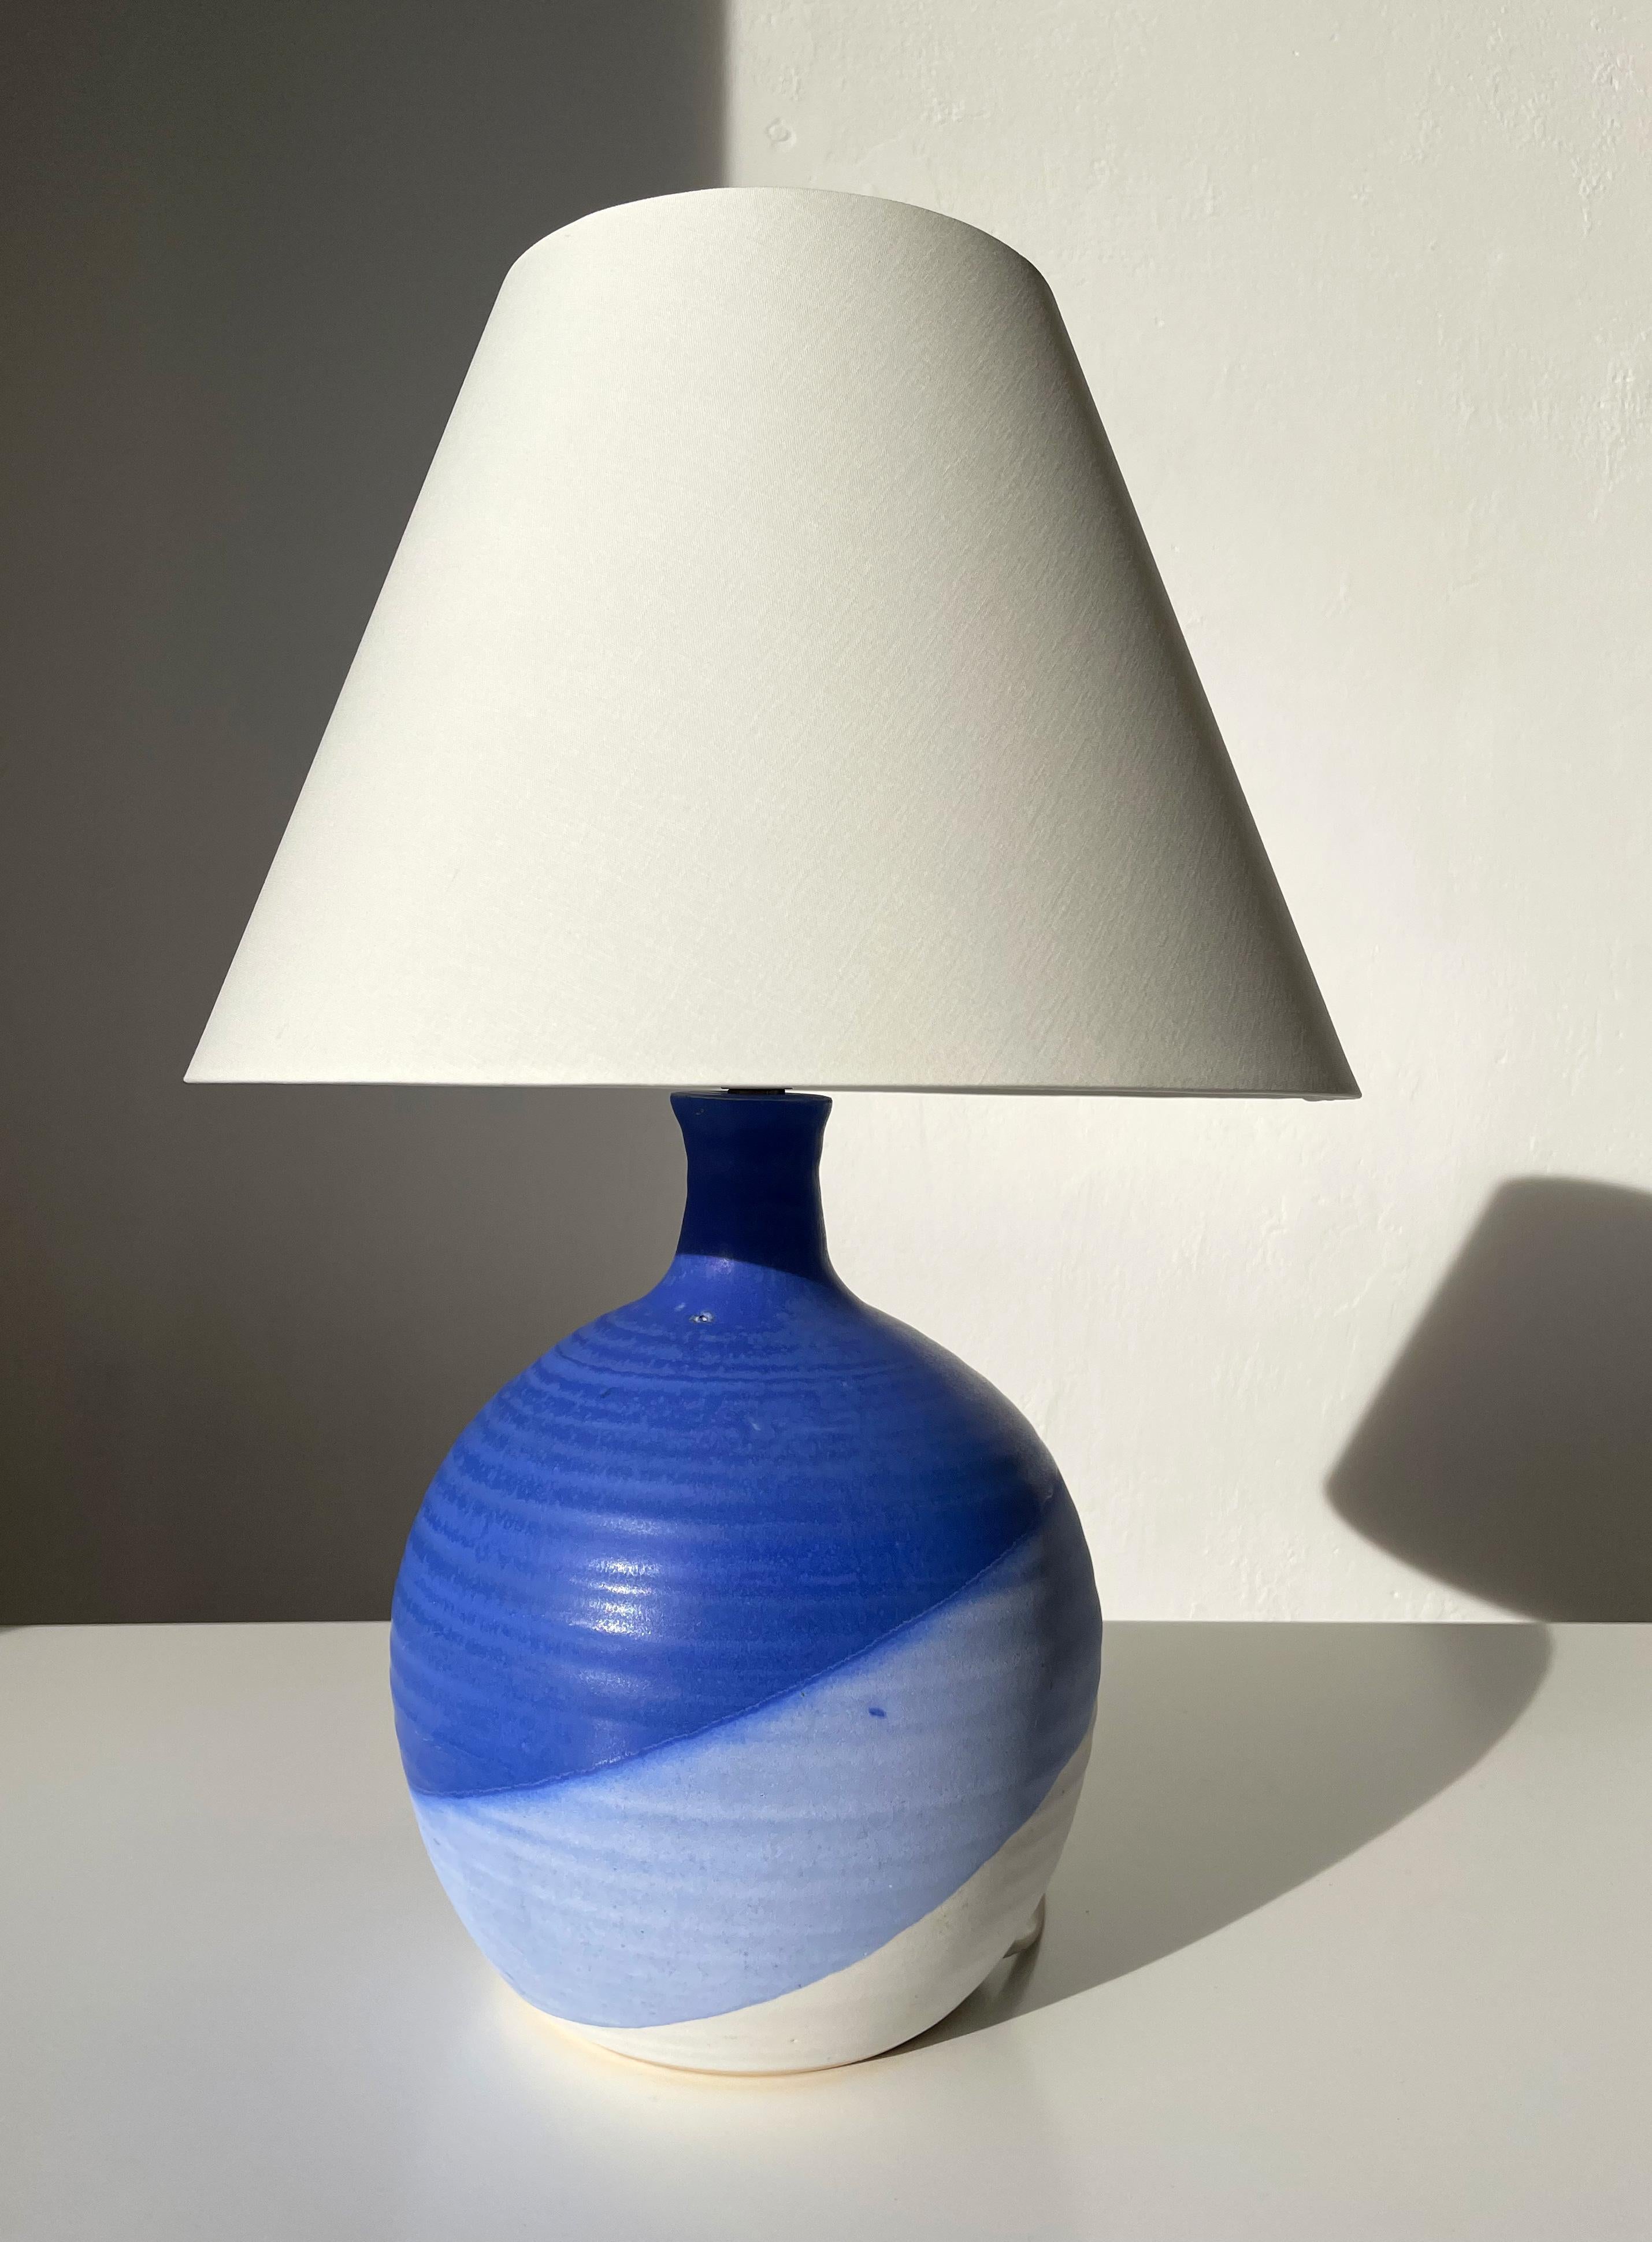 80's lamps